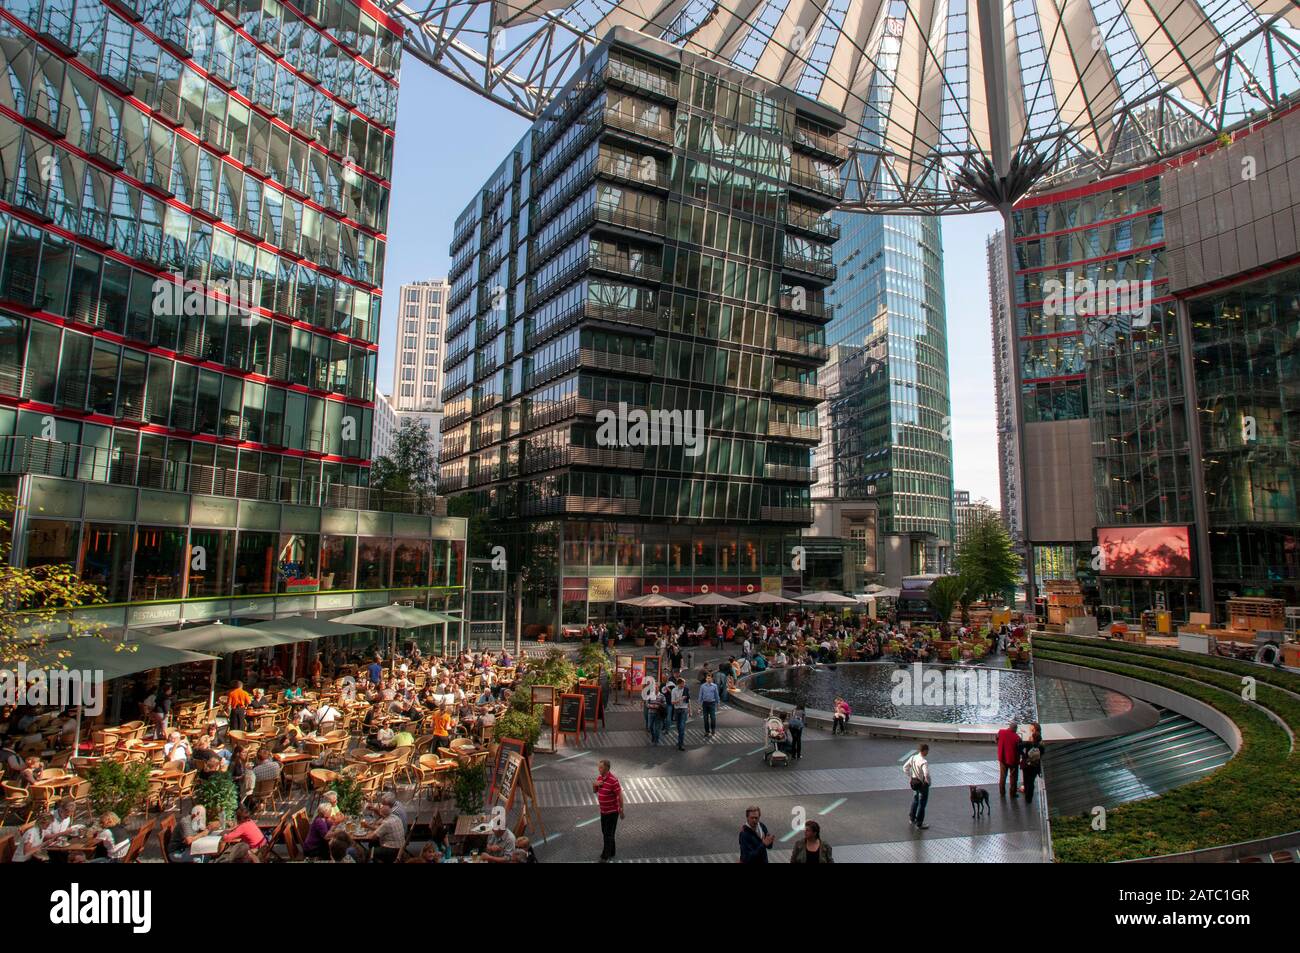 Cinemes and restaurants in the interior atrium of Sony Center in Potsdamer Platz in Berlin, Germany Stock Photo